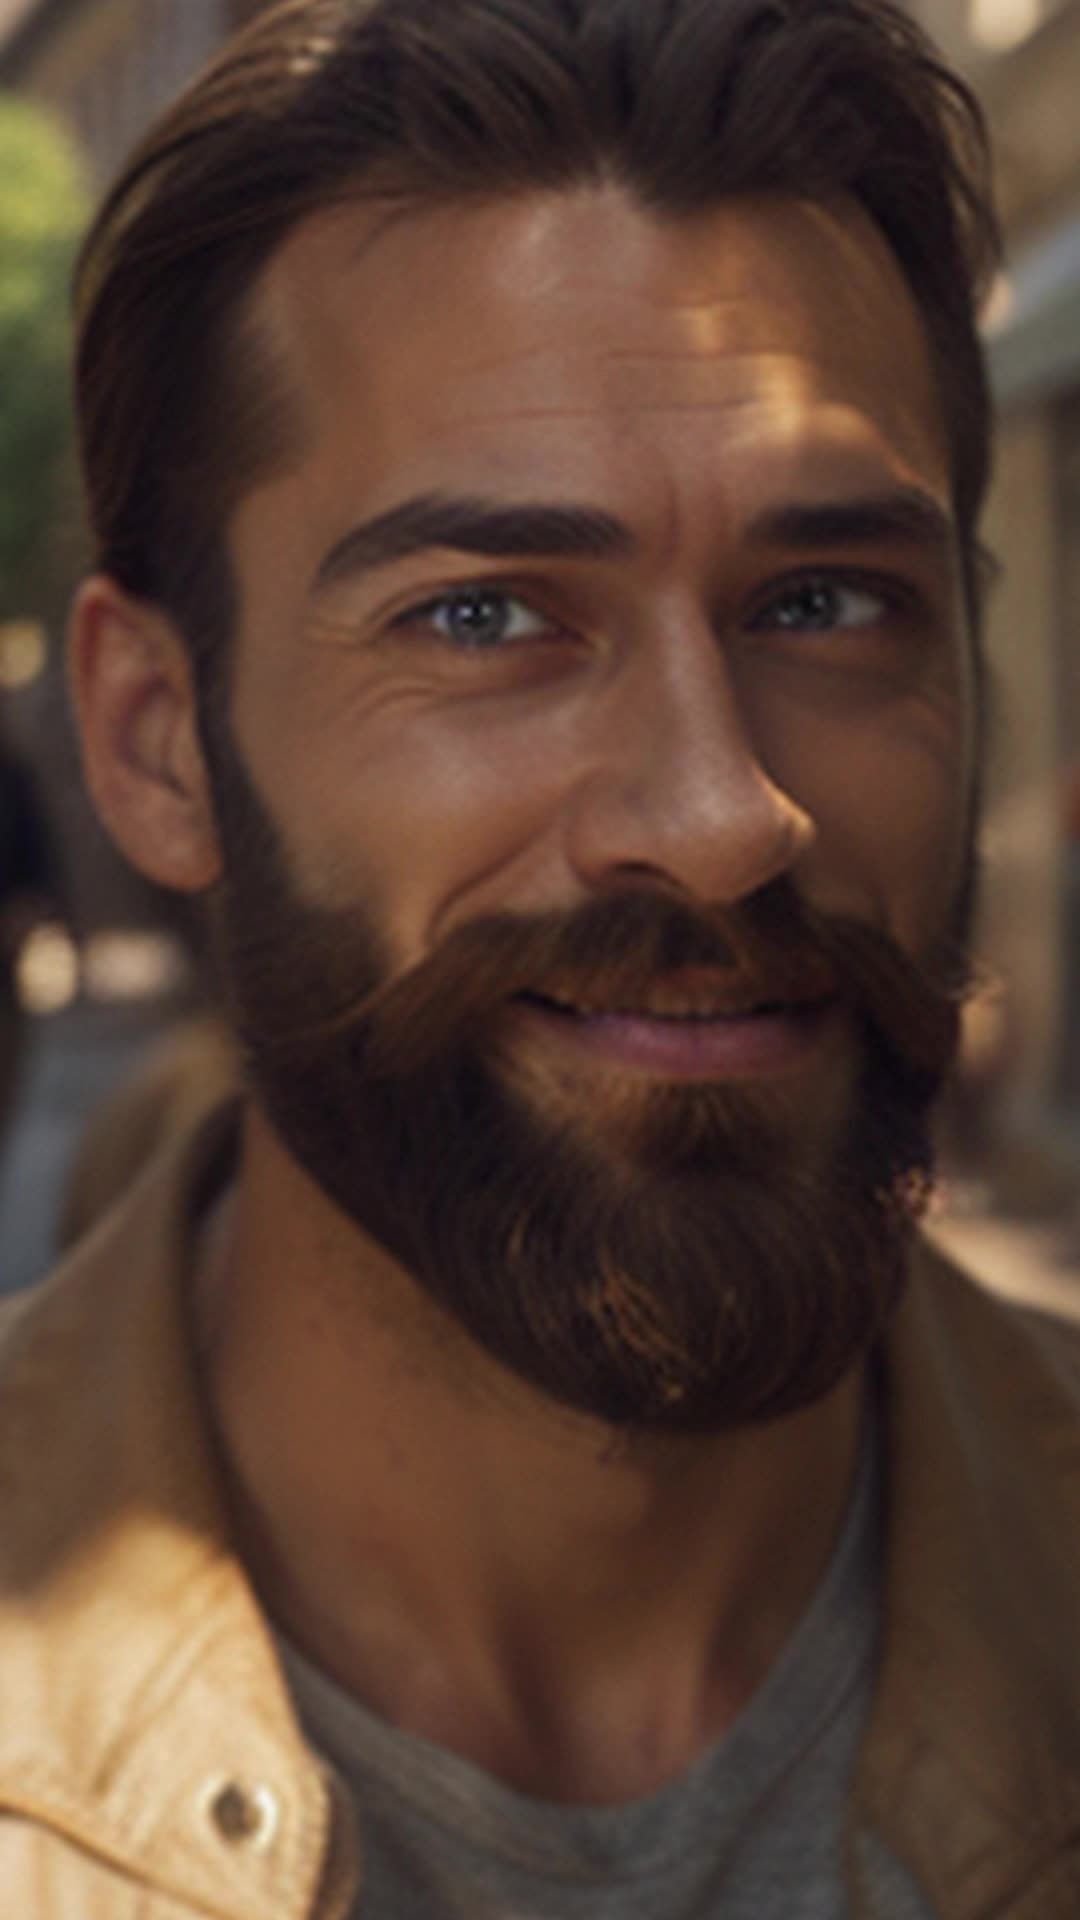 Transformed beard, lustrous shine, Tim smiling confidently, head-turning moments, citizens of town looking impressed, vibrant street scene, crisp sunny day, soft shadows enhancing facial features